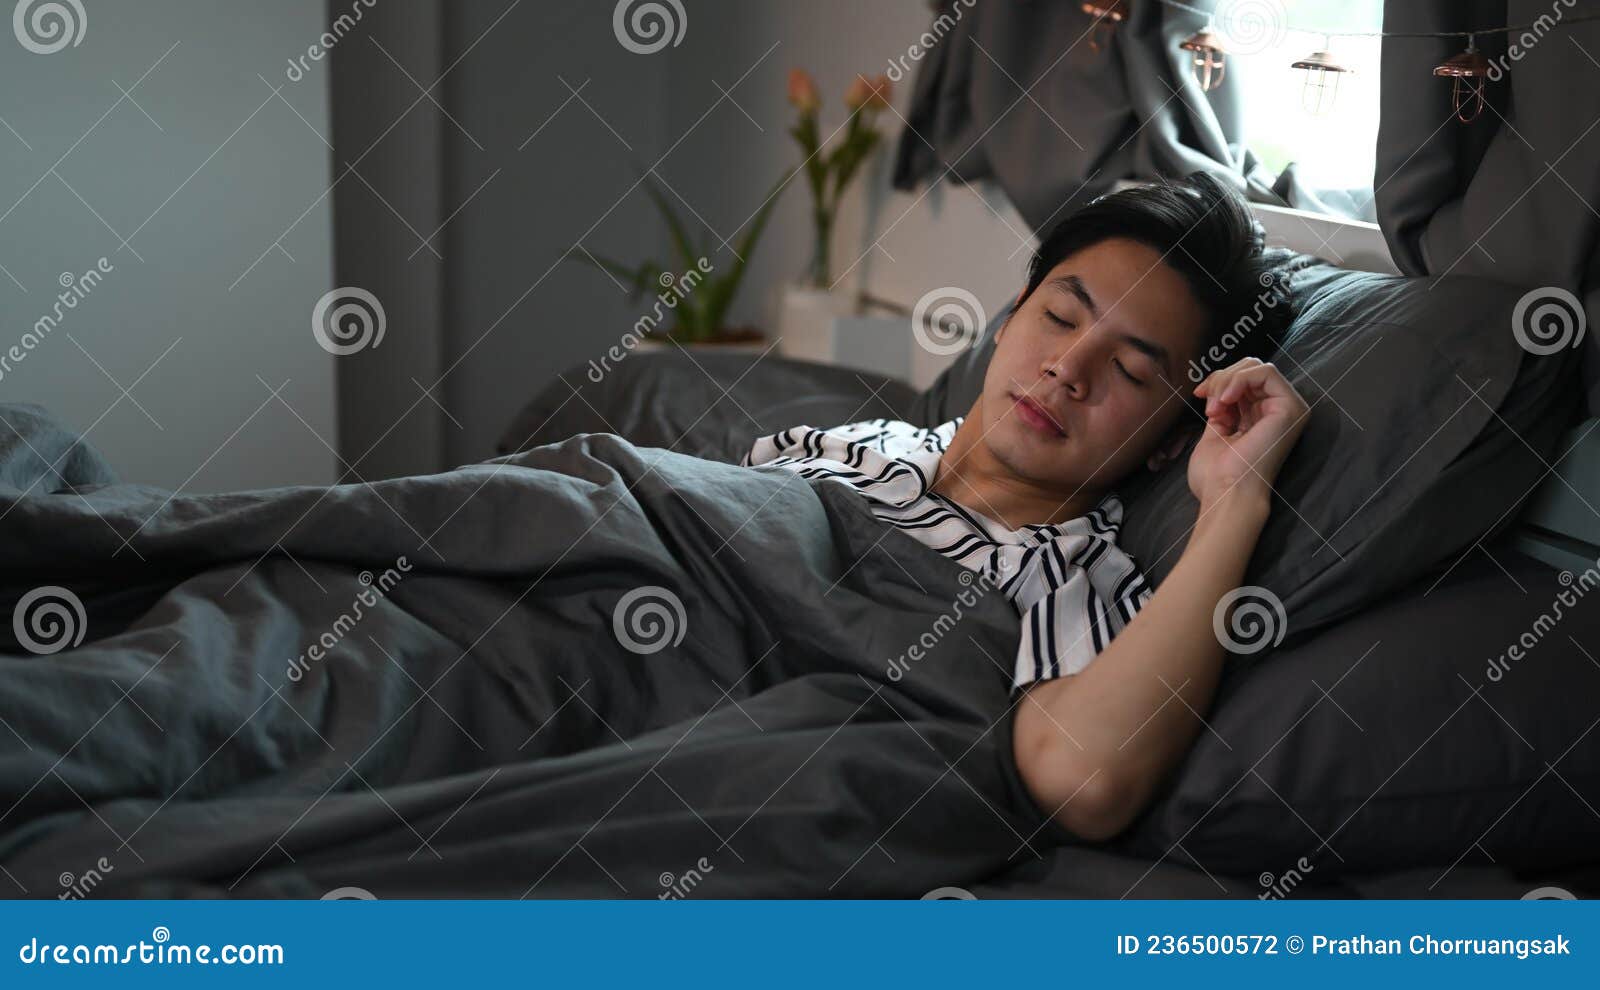 man sleeping in his comfortable bed after tiring day.